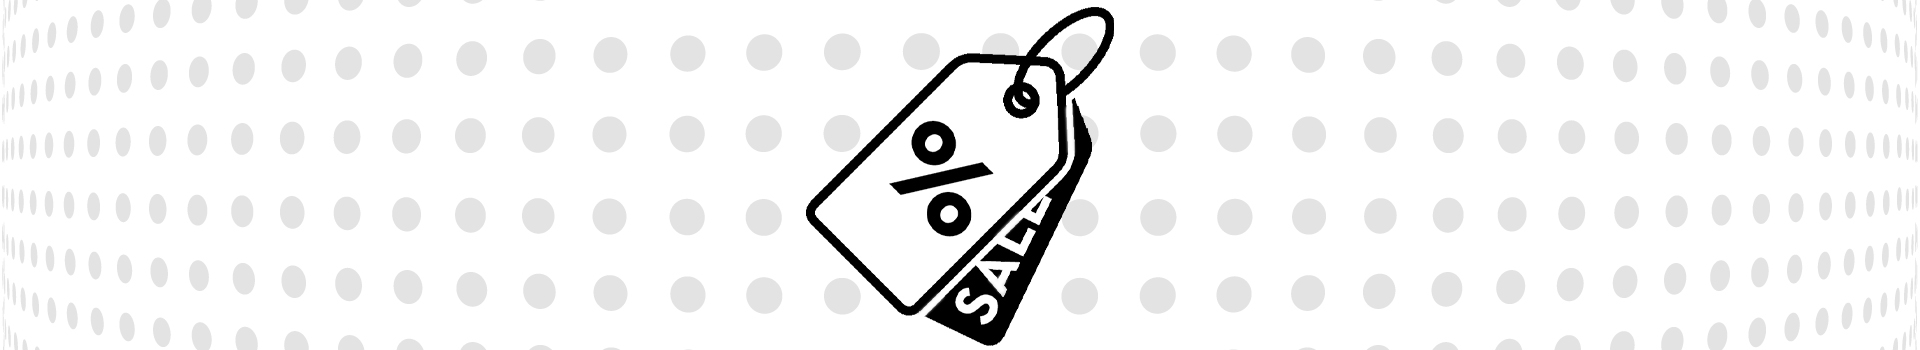 Graphic of two price tags, one with percentage sign, one with the word "Sale".